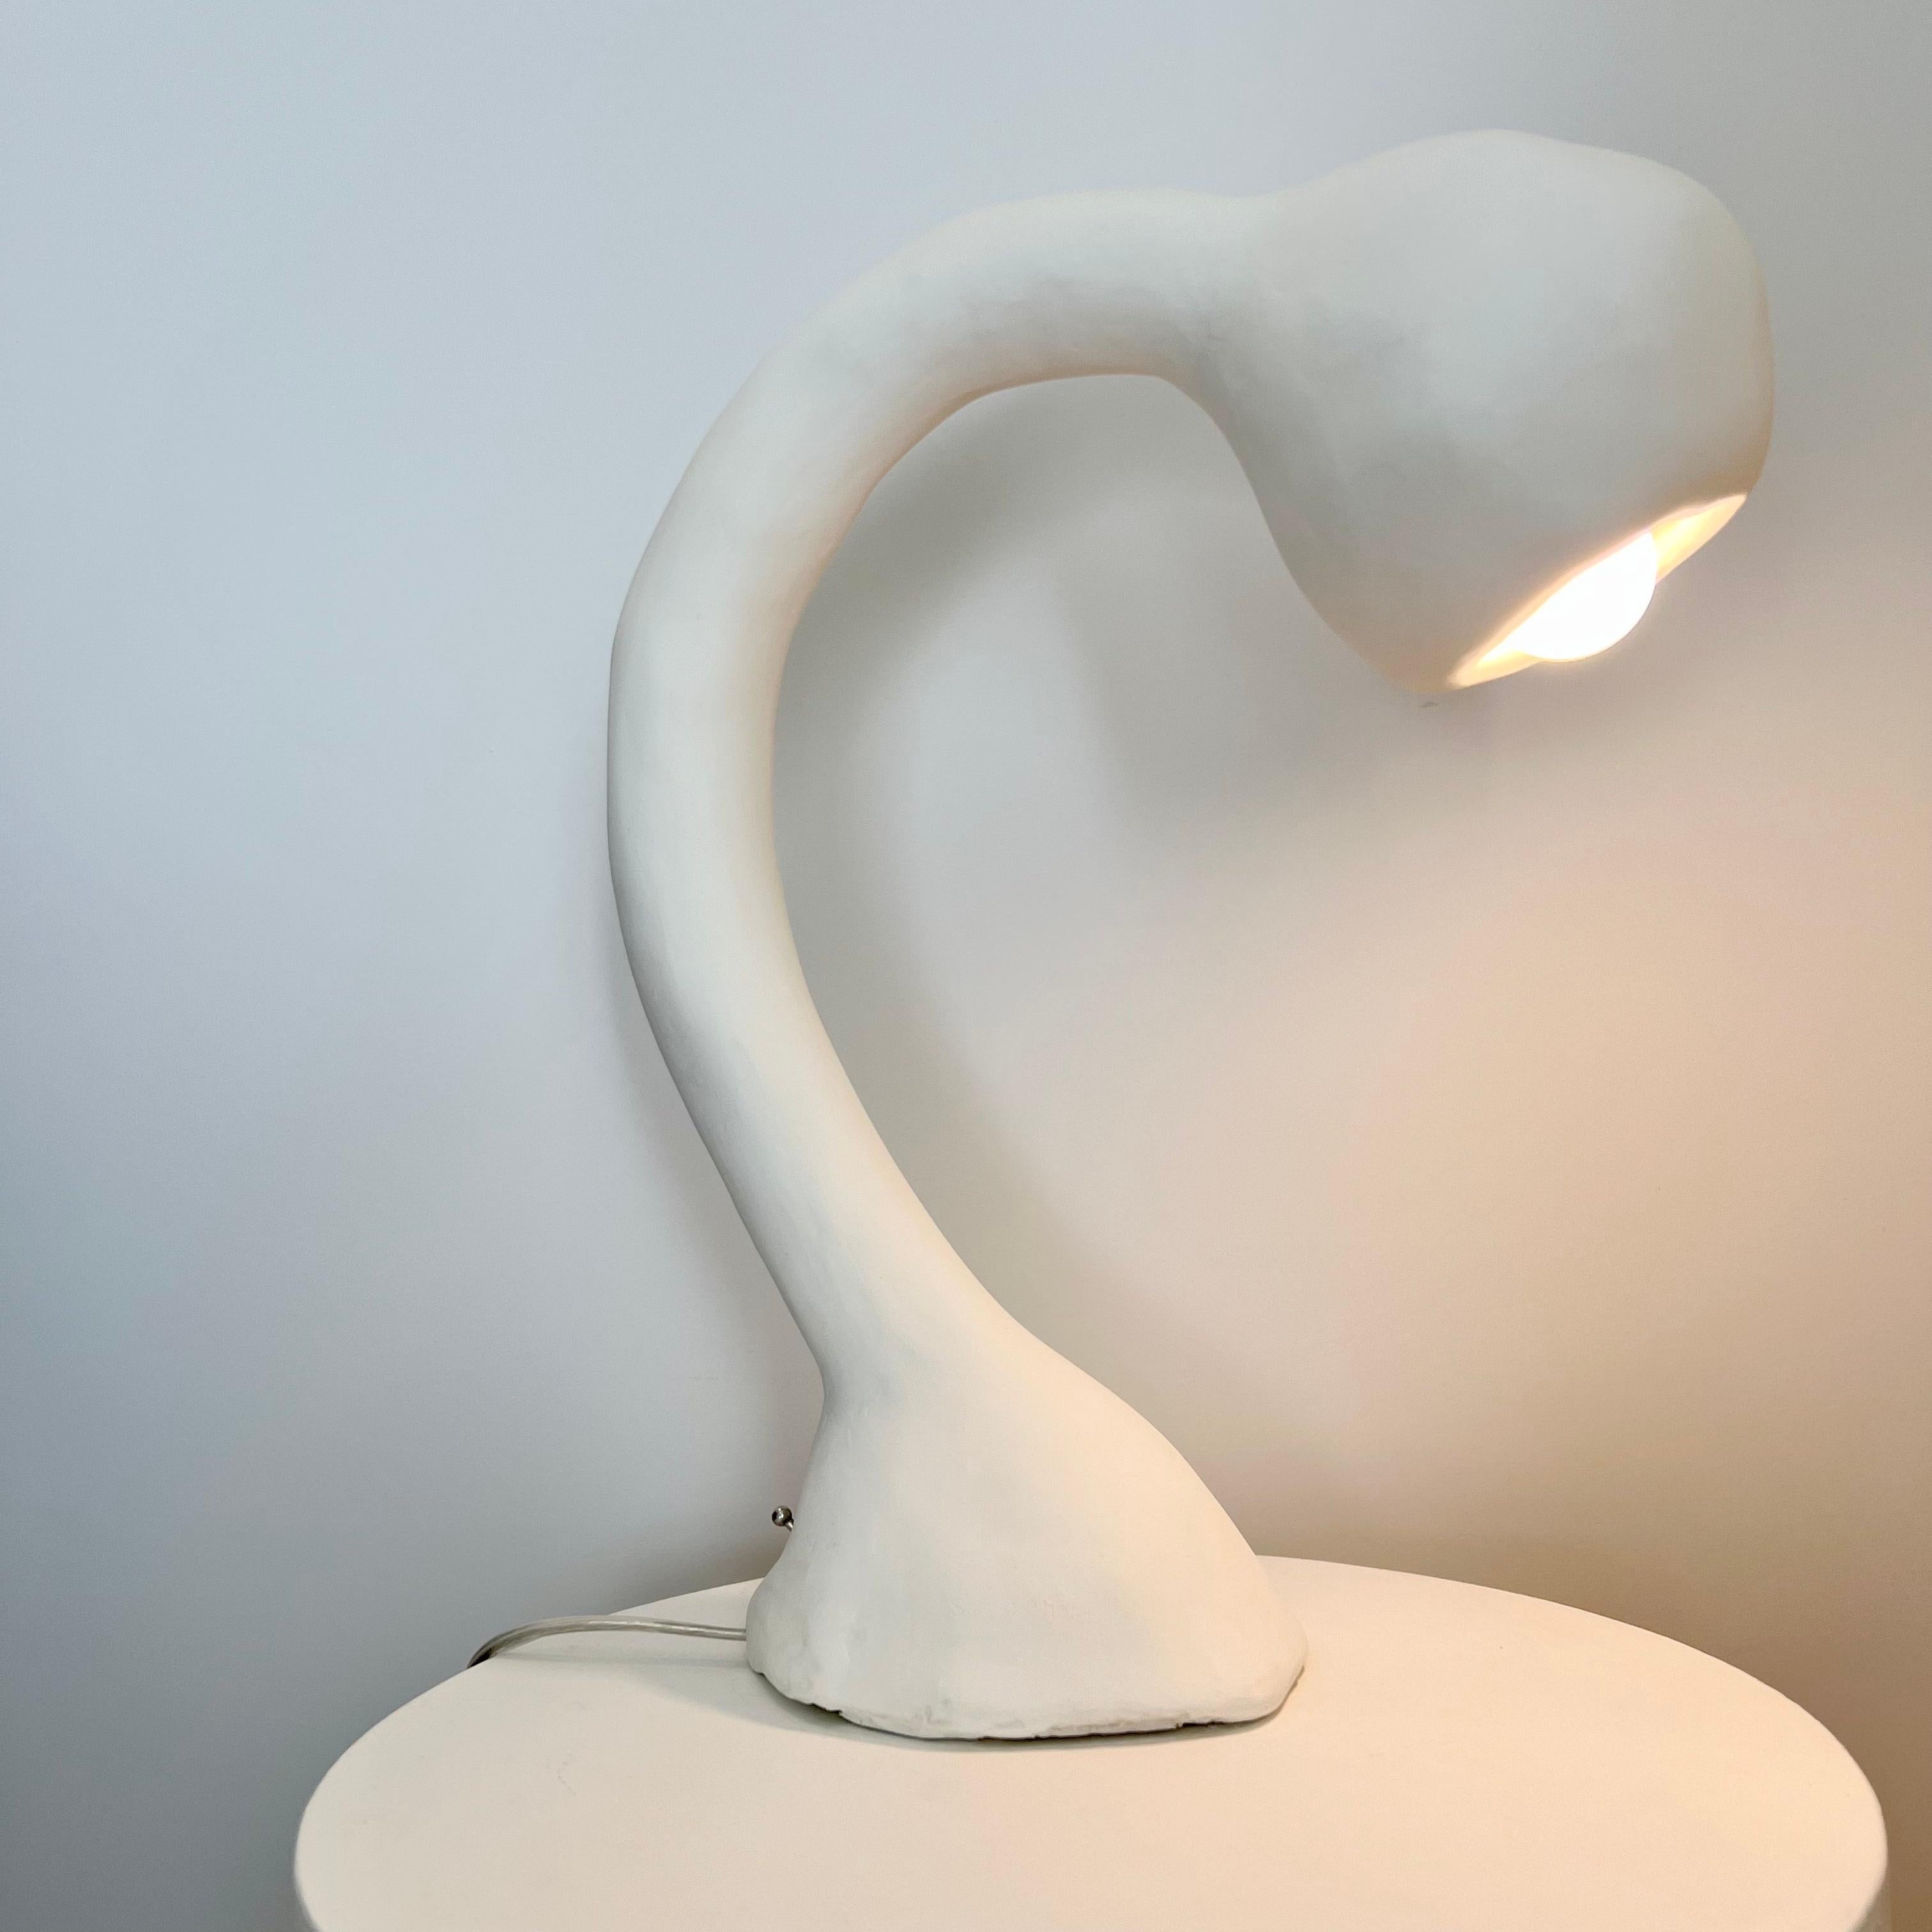 Hand-Crafted Biomorphic Line by Studio Chora, Table Lamp, White Lime Plaster, Made-To-Order